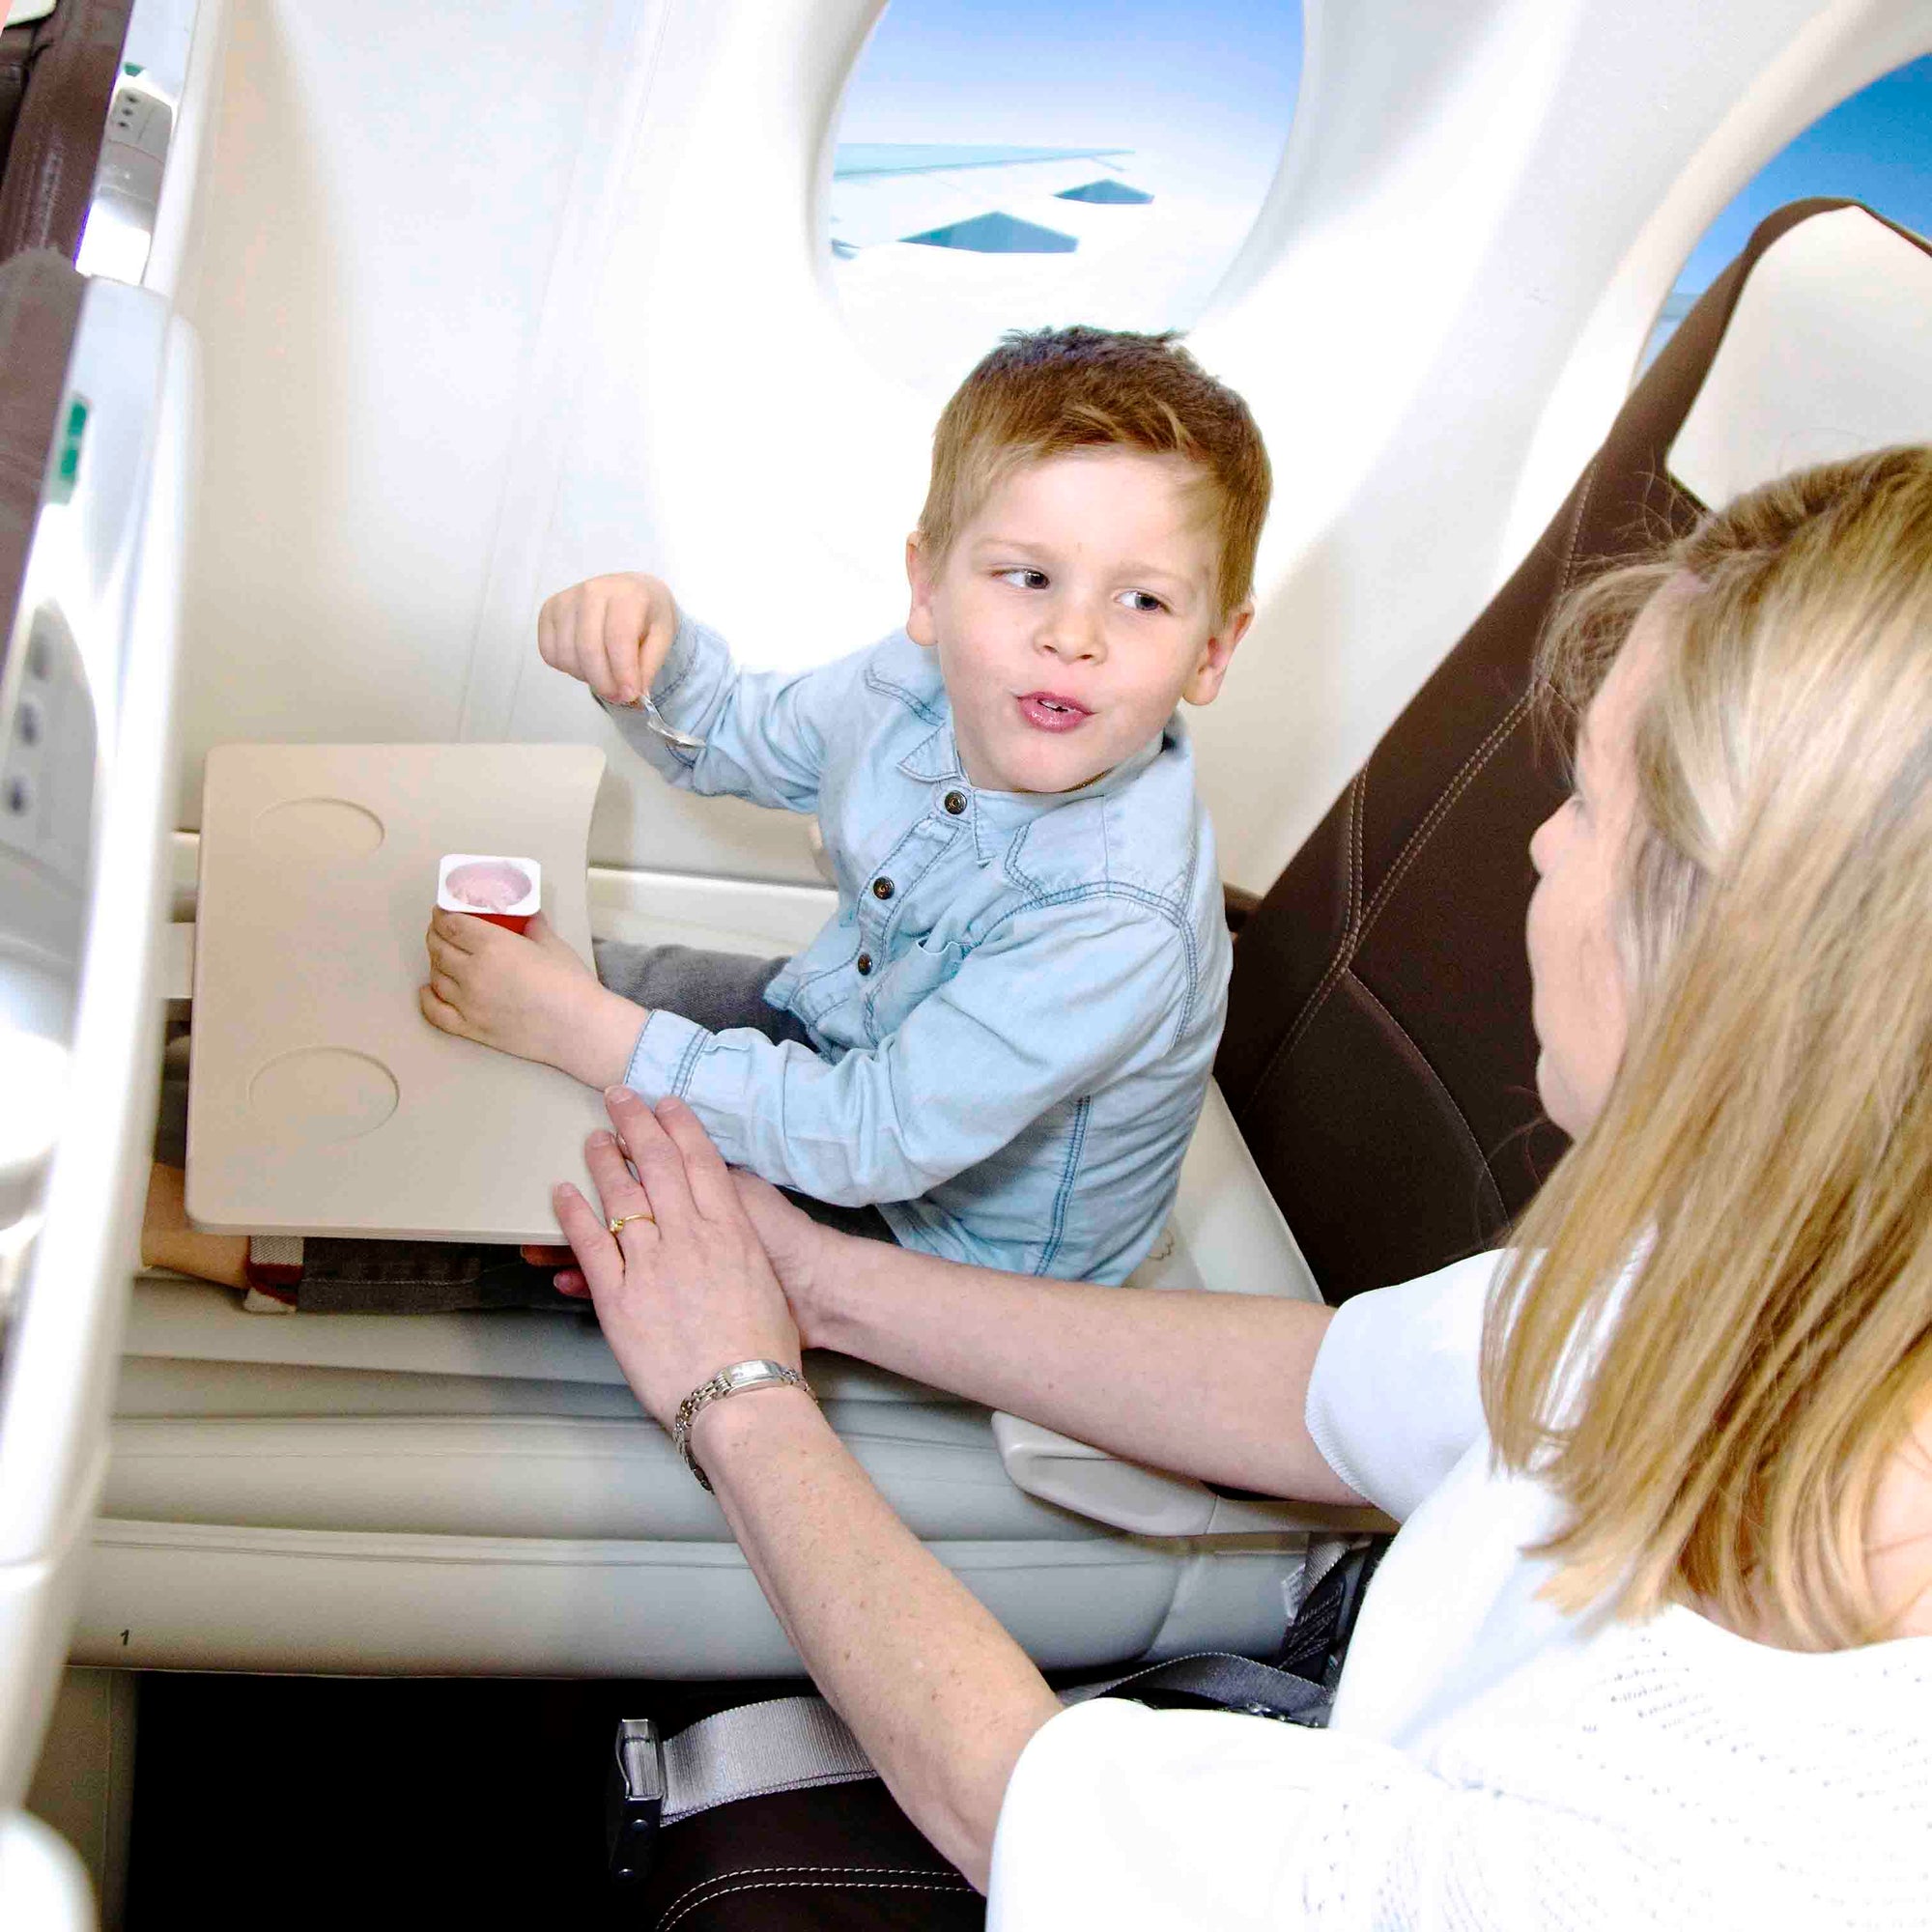 FLYAWAY KIDS BED: Parents LOVE this airline approved travel